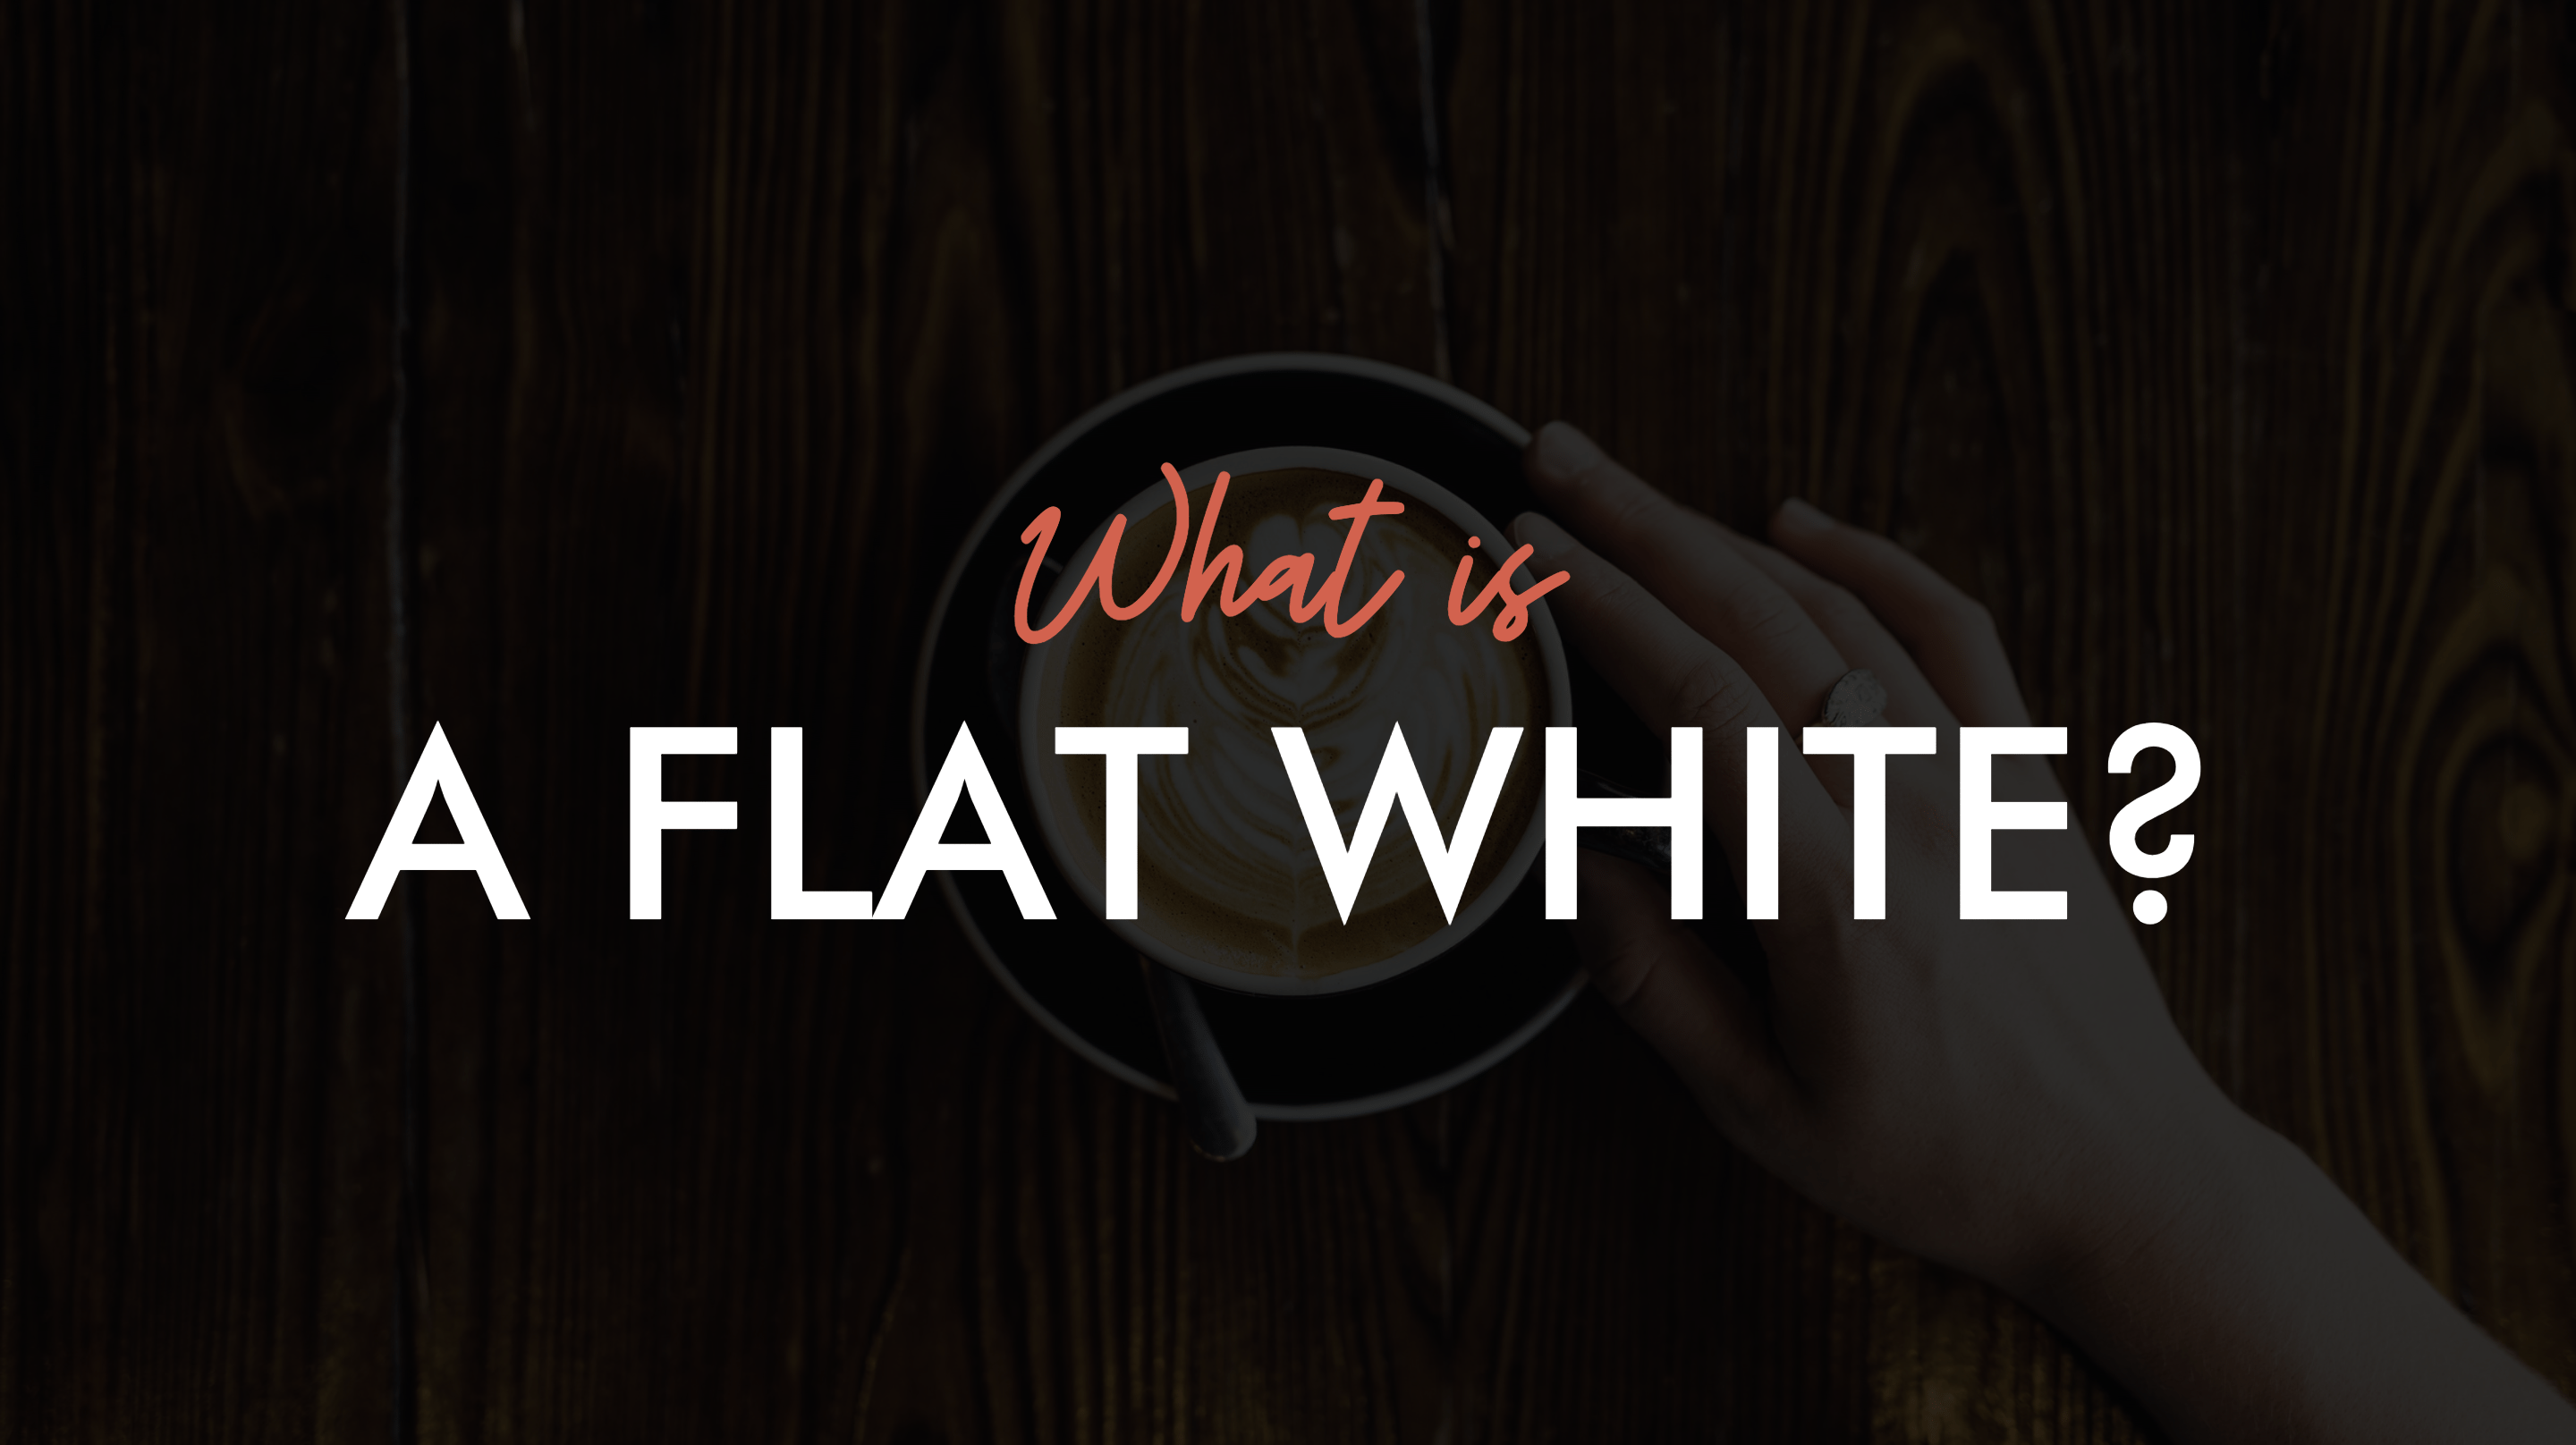 About The Flat White